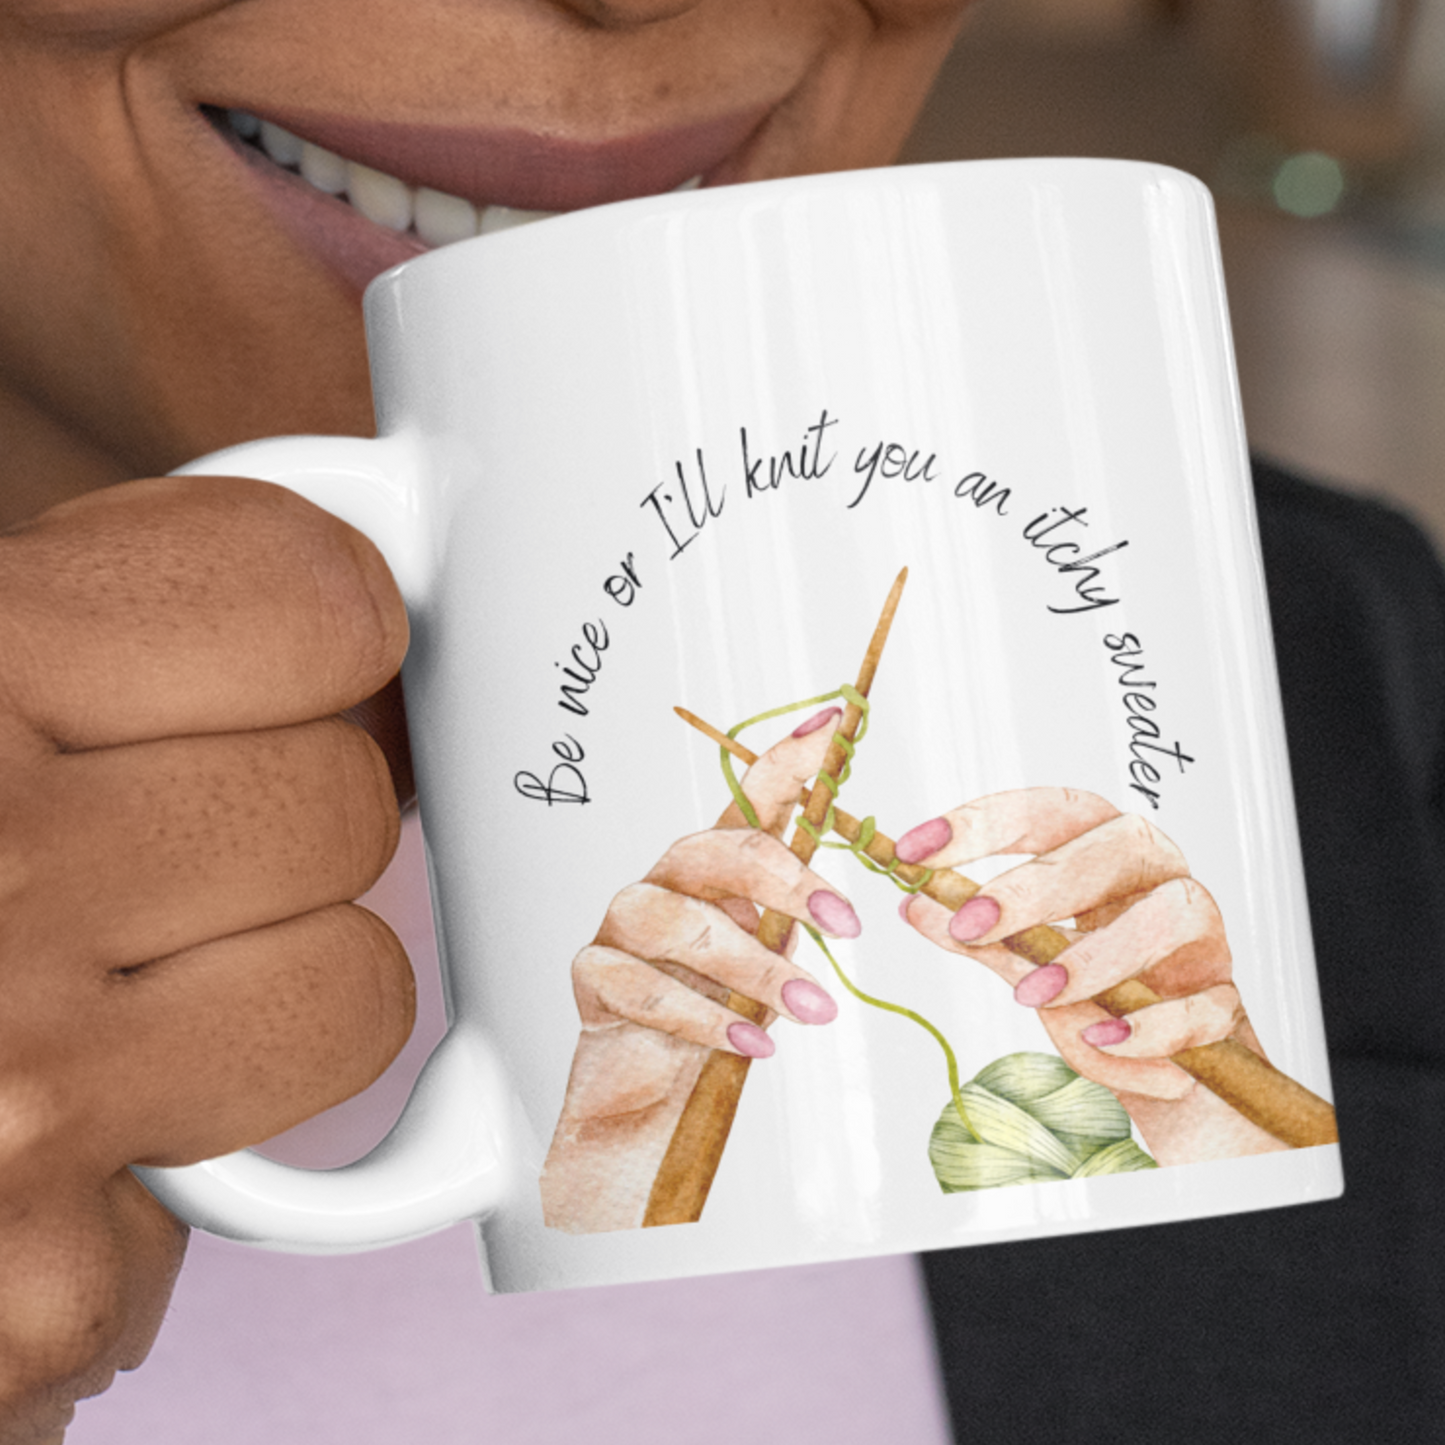 "Be Nice or I'll Knit You an Itchy Sweater" Mug